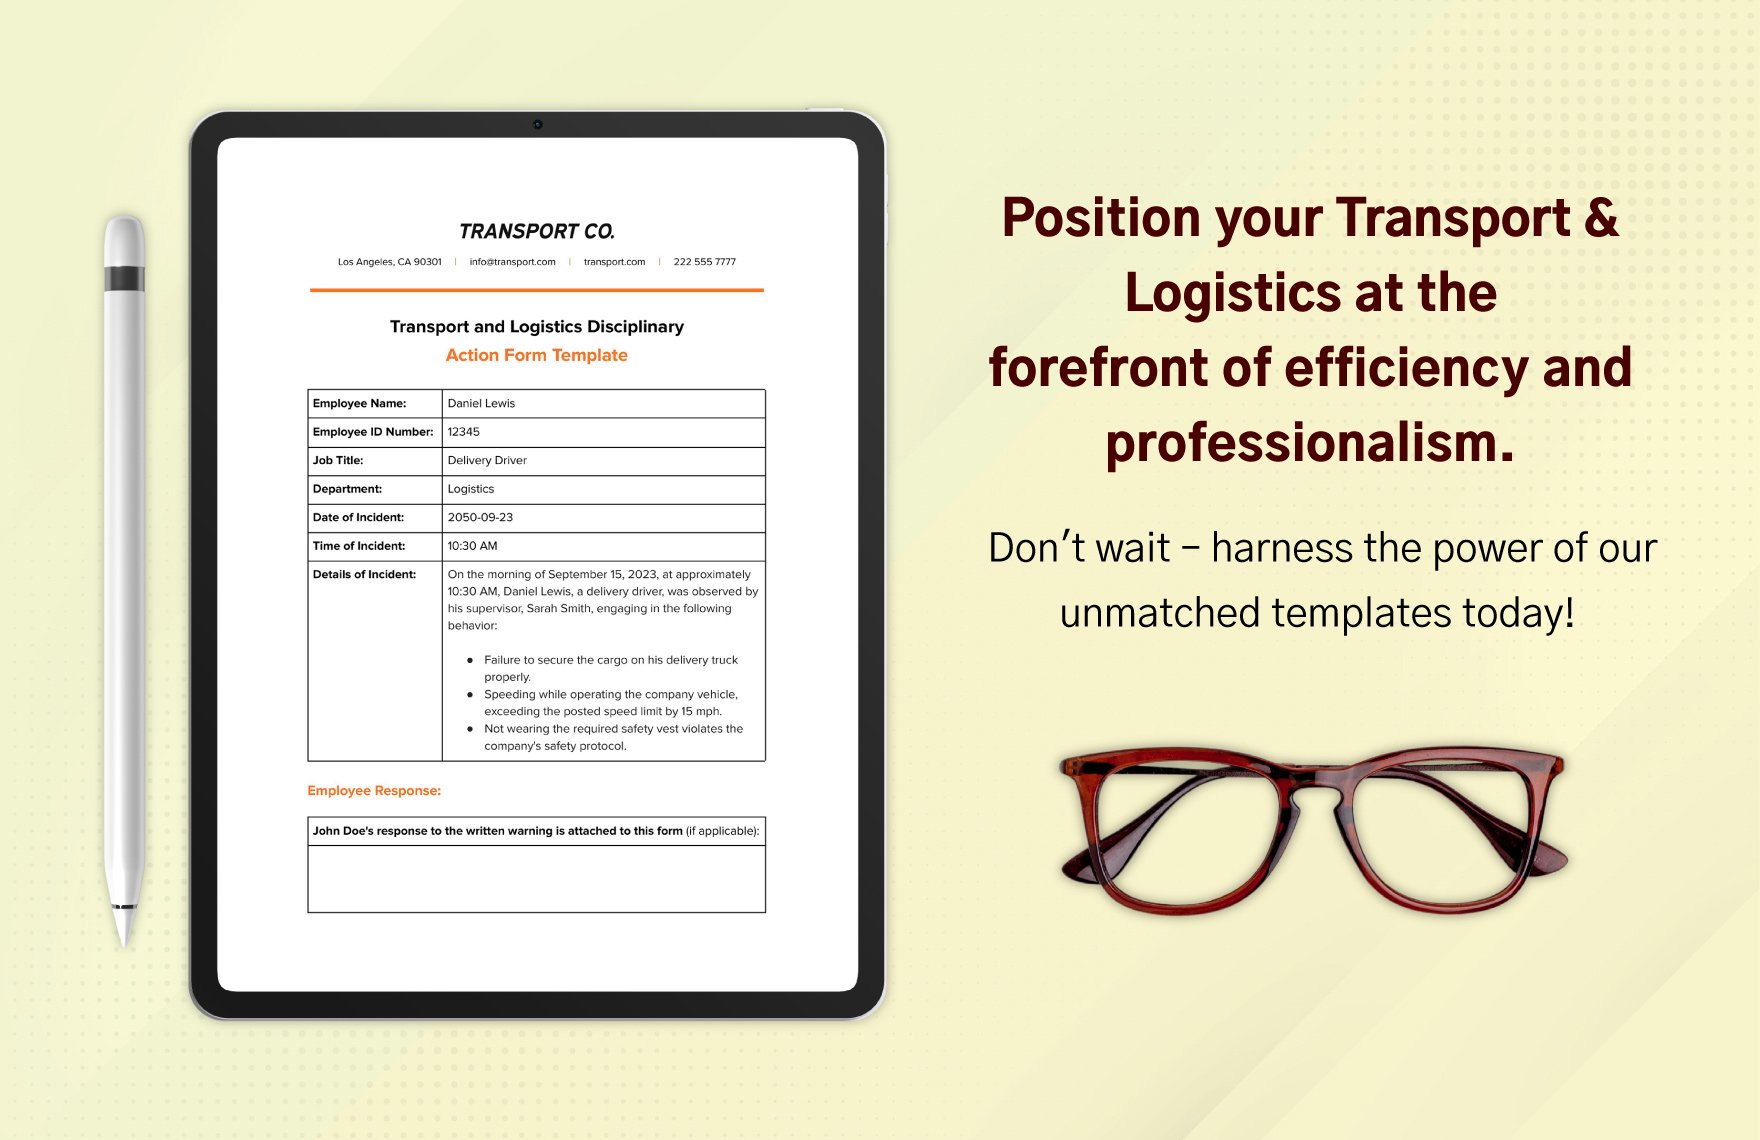 Transport and Logistics Disciplinary Action Form Template